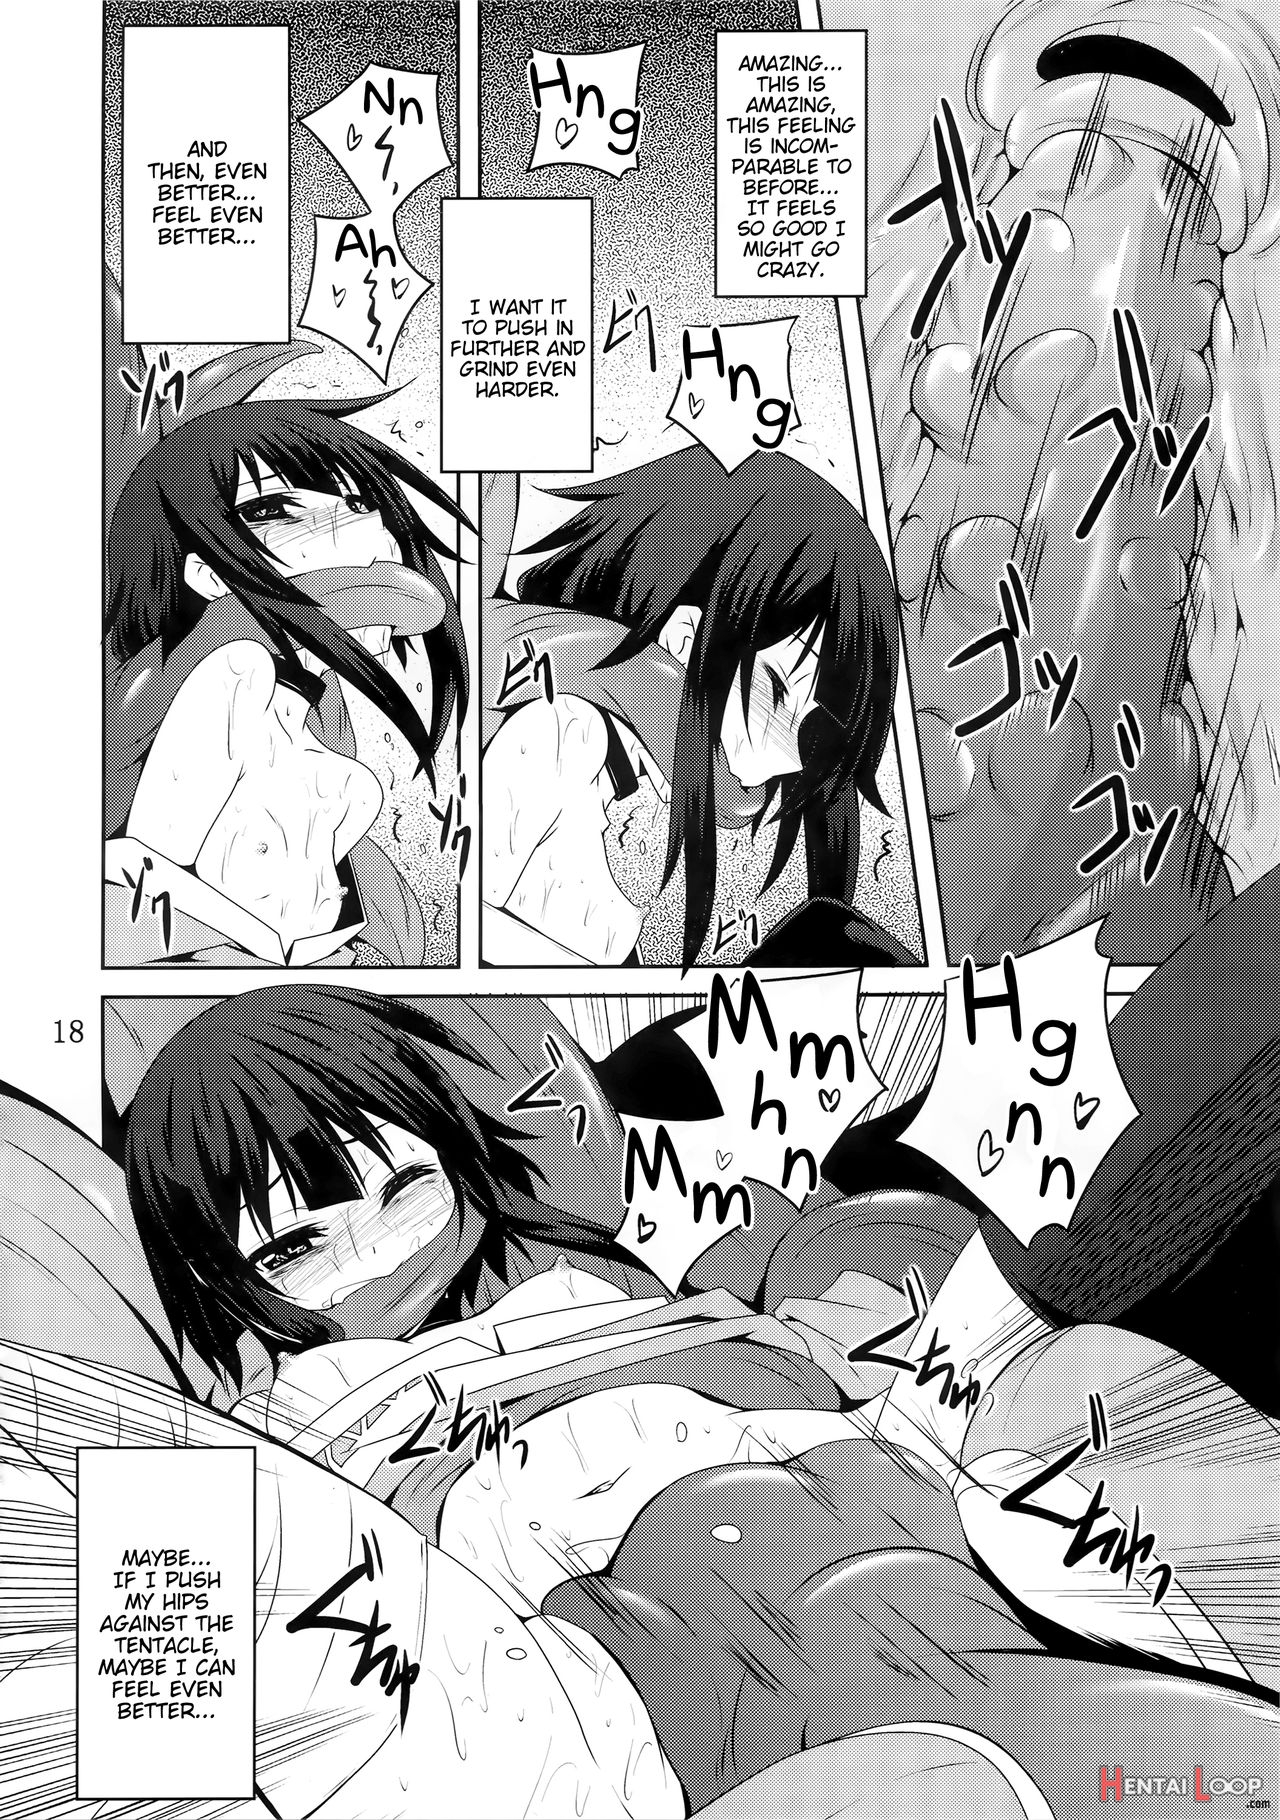 Blessing Upon Megumin And The Tentacle page 15